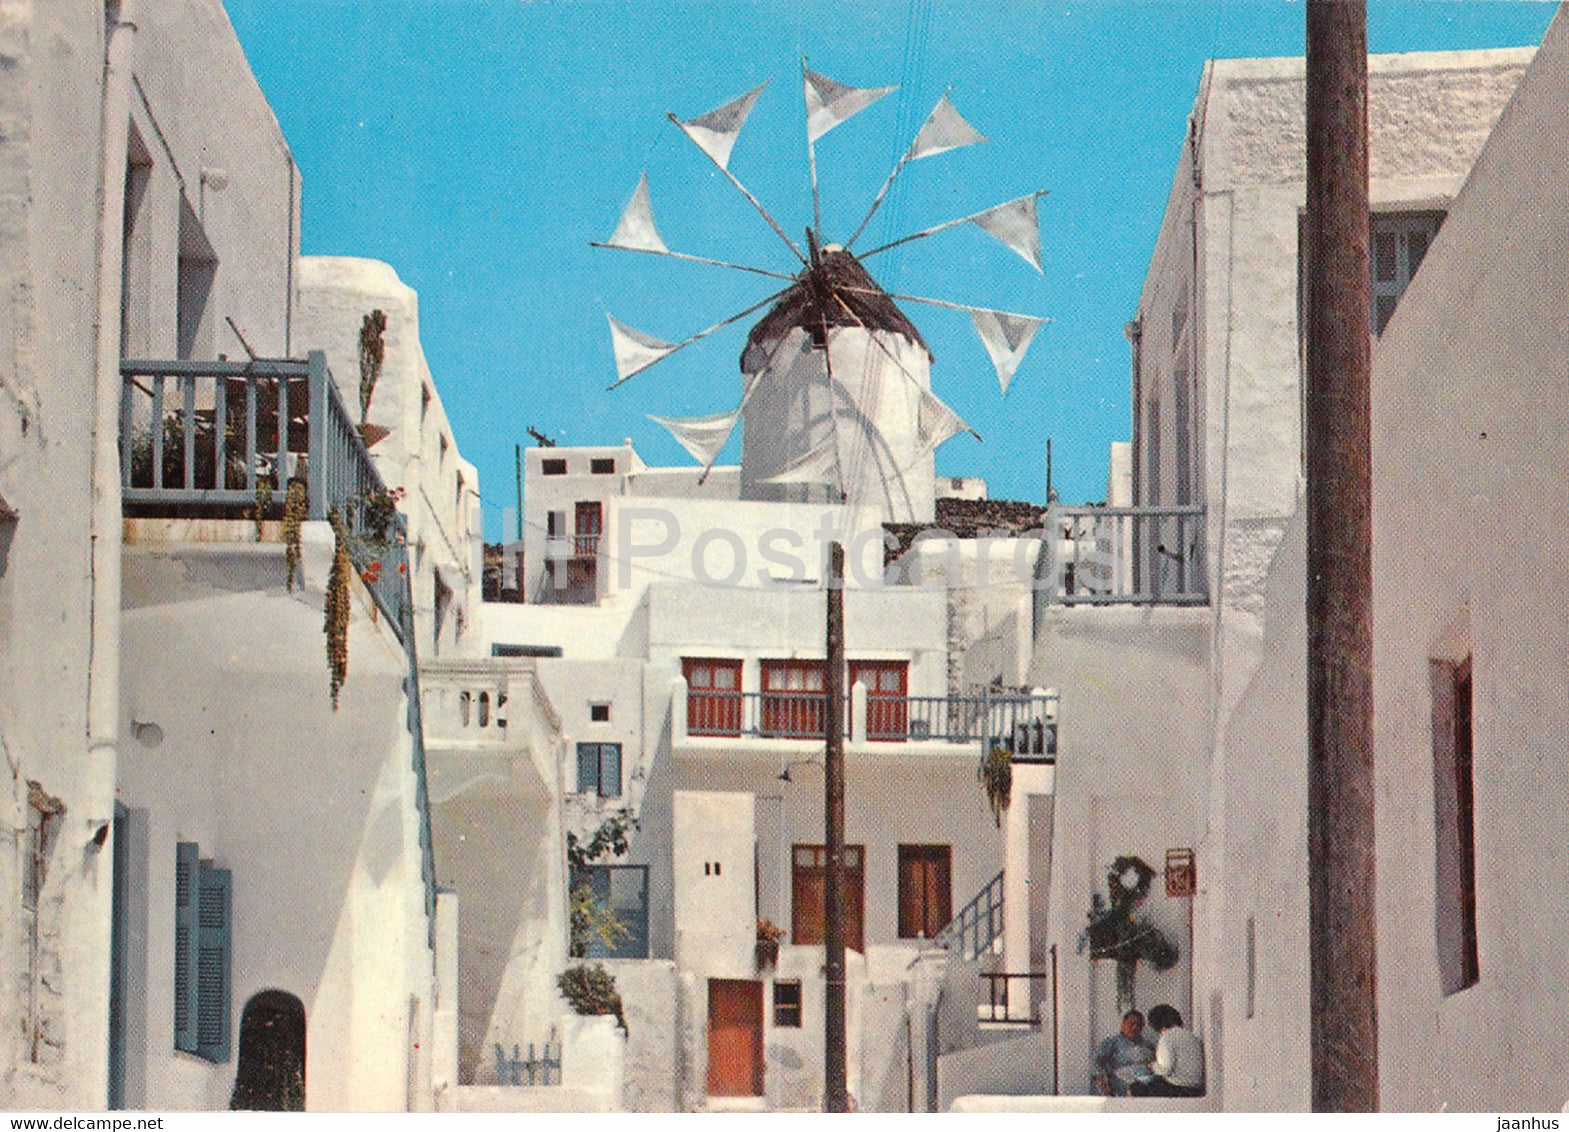 Myconos - Mykonos - Picturesque view - windmill - 1970 - Greece - used - JH Postcards